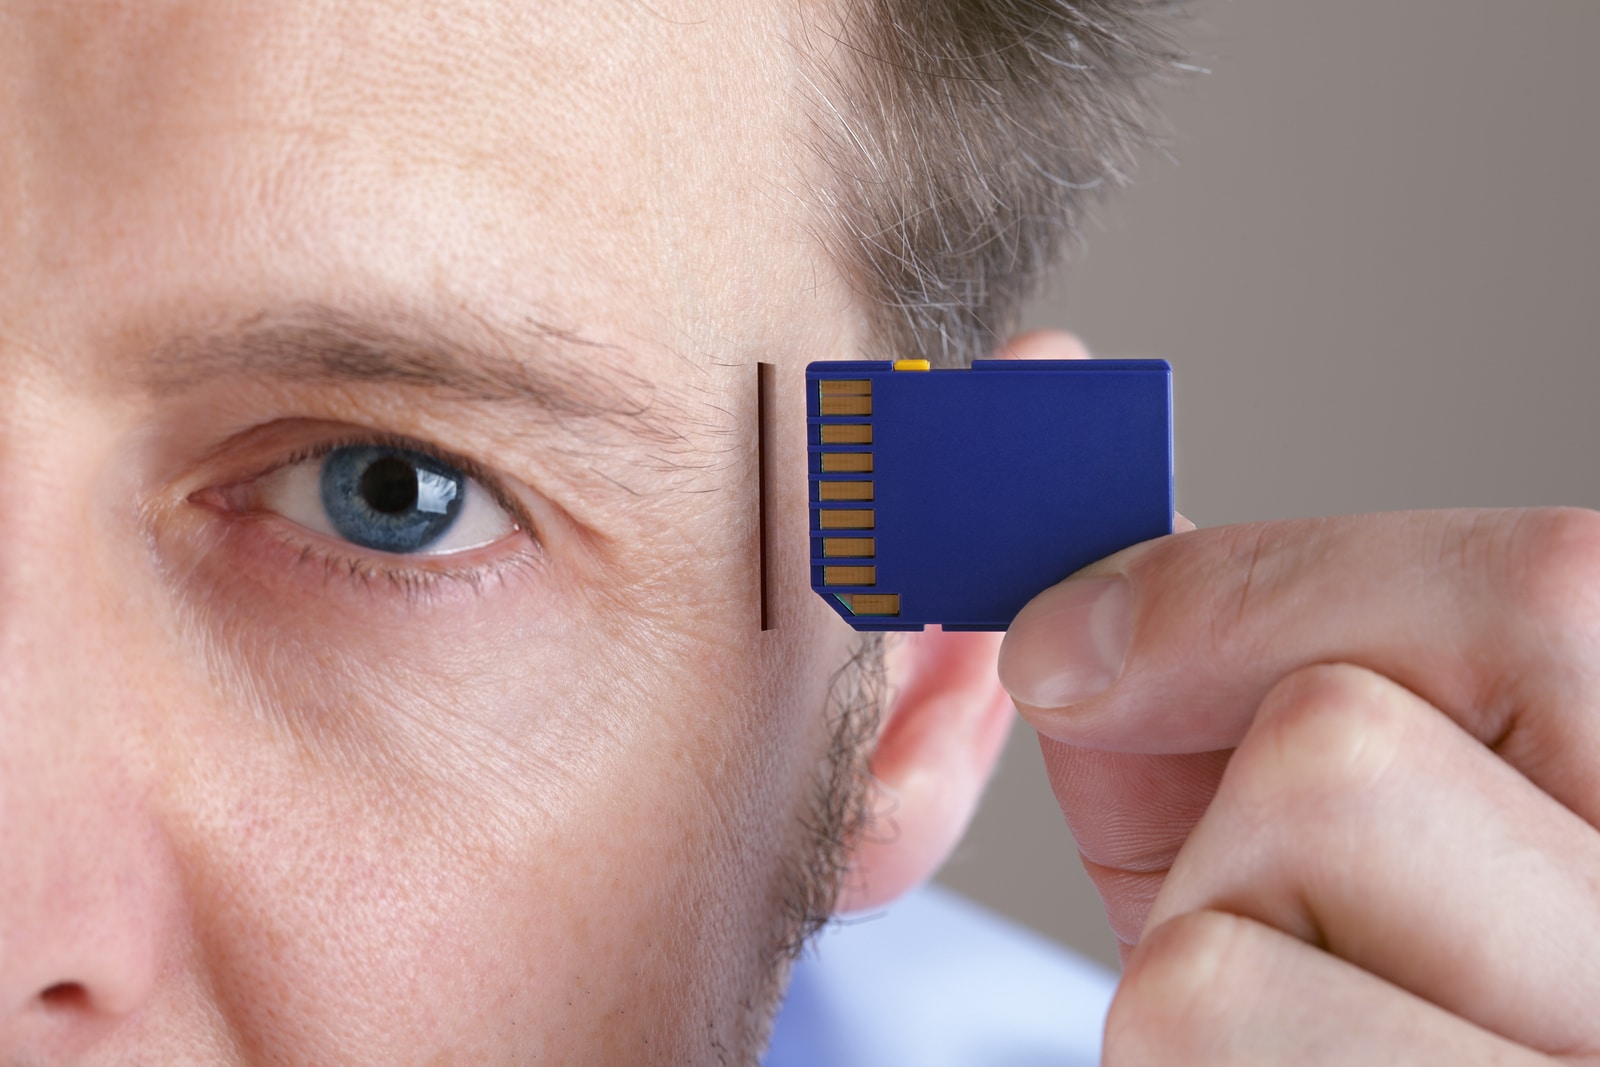 Inserting SD memory card into slot in human head concept for memory upgrade, forgetfulness or computing